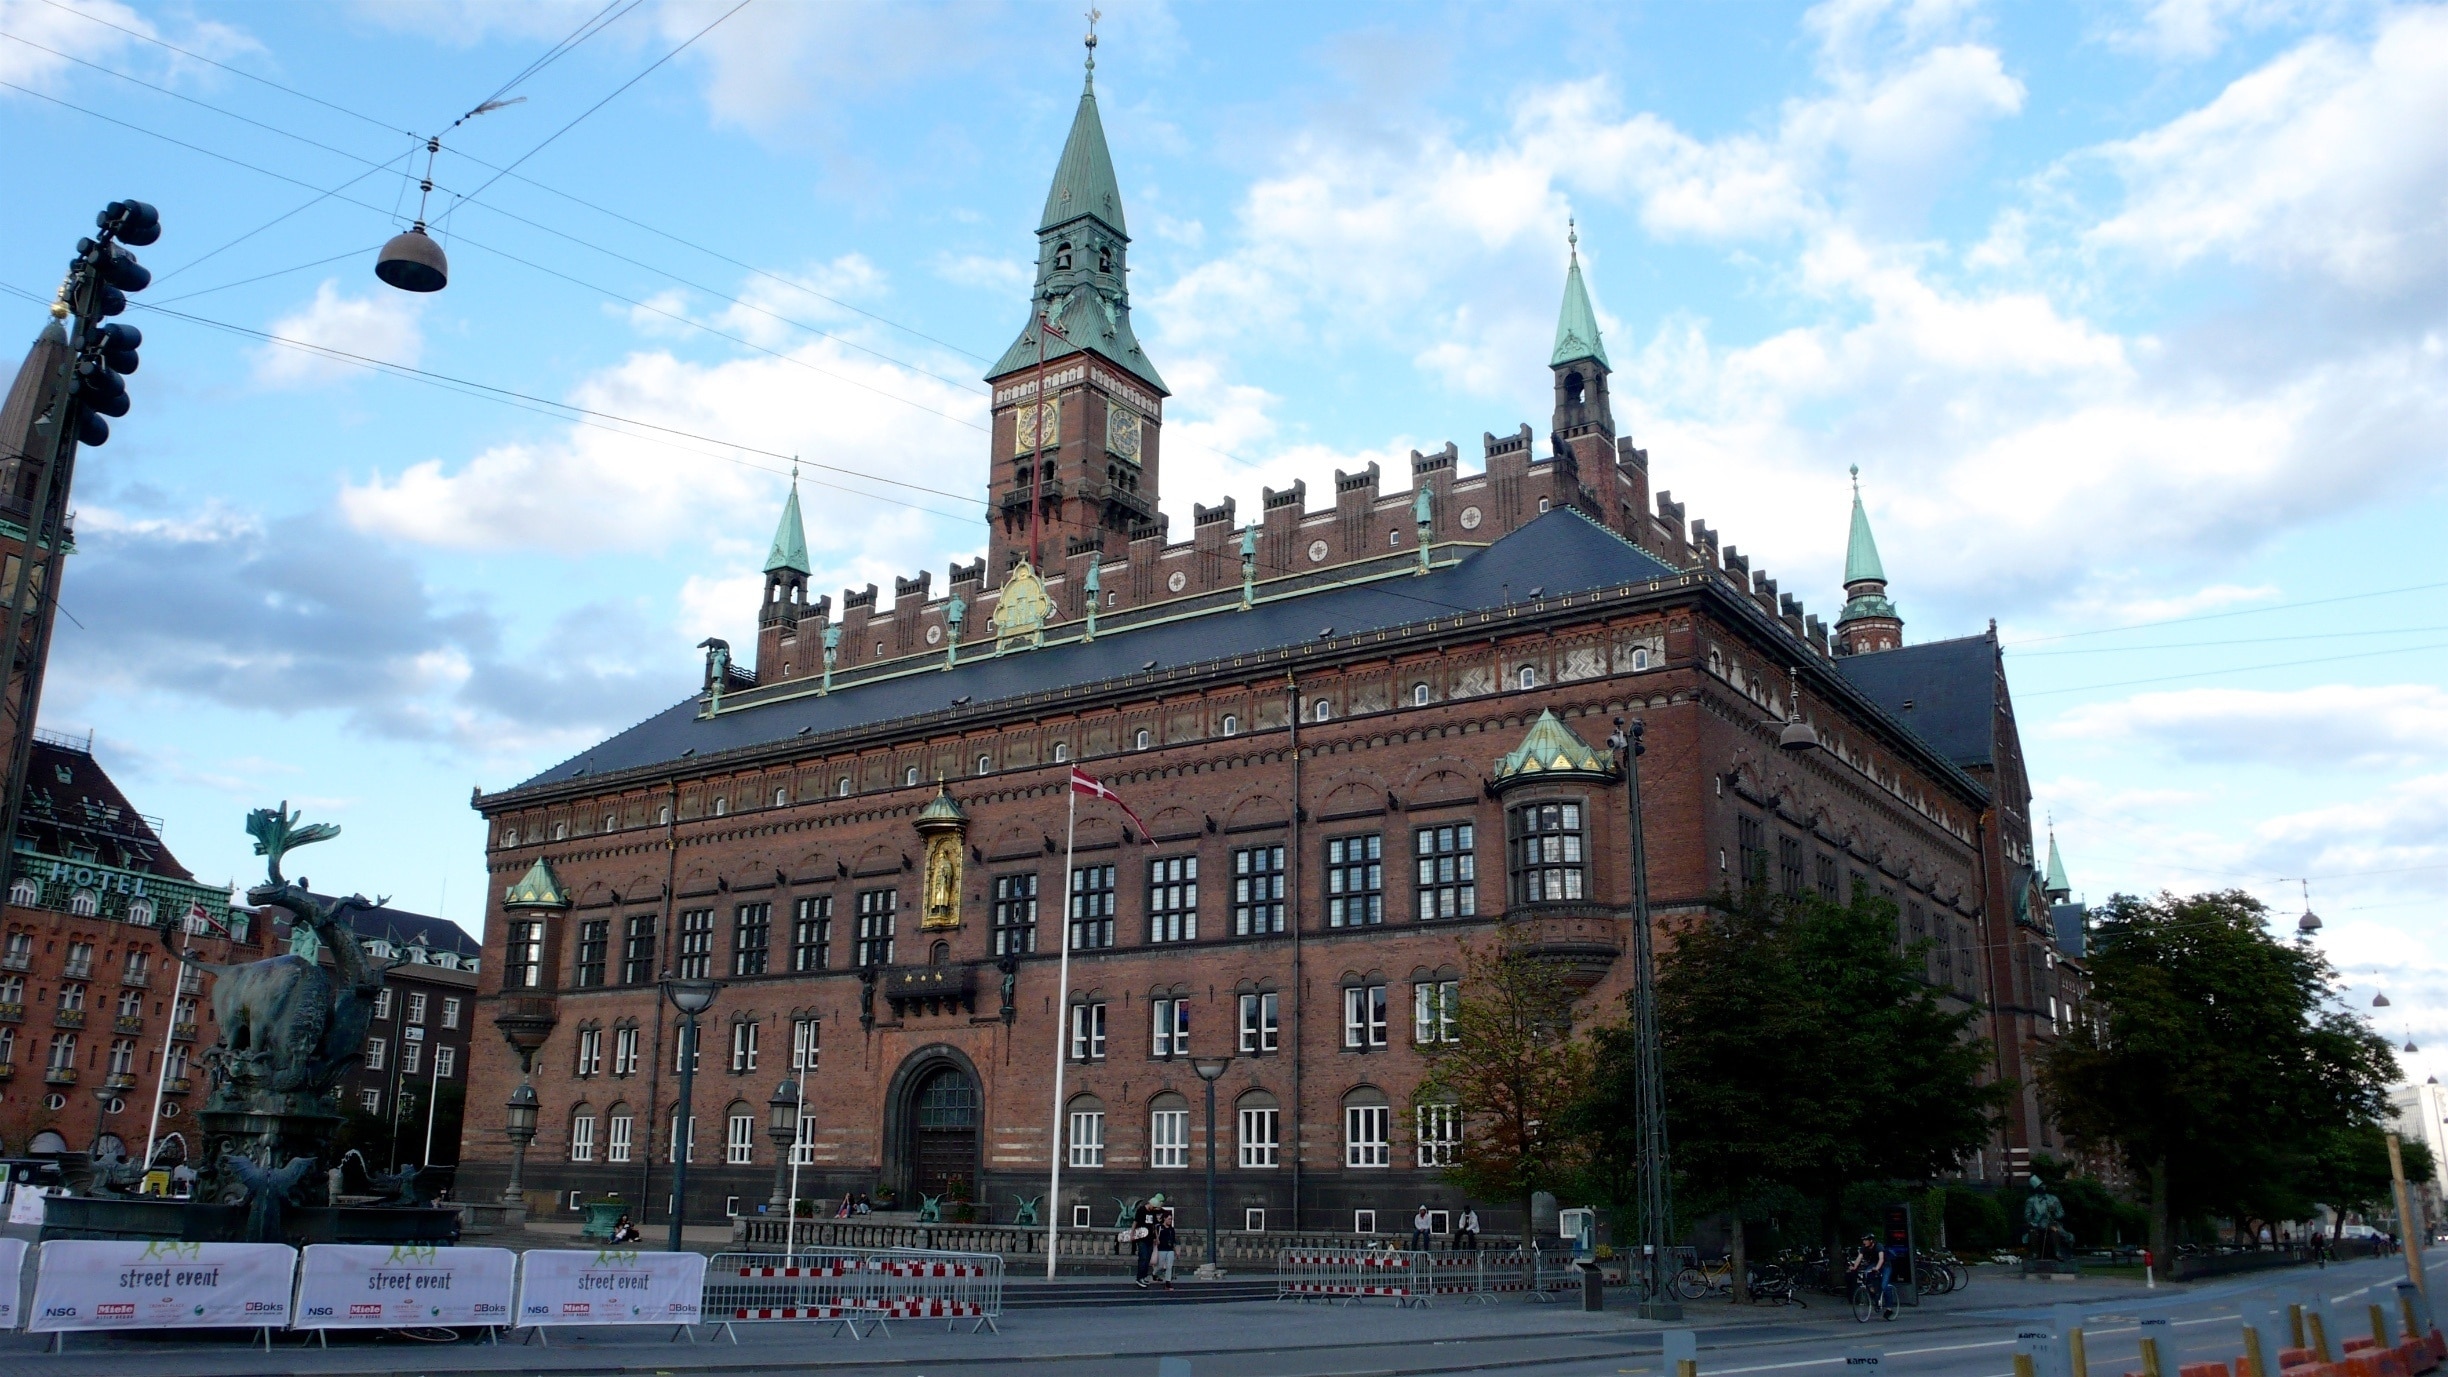 Copenhagen City Hall is the headquarters of the municipal council as well as the Lord mayor of the Copenhagen Municipality, Denmark. The building is situated on City Hall Square in central Copenhagen.